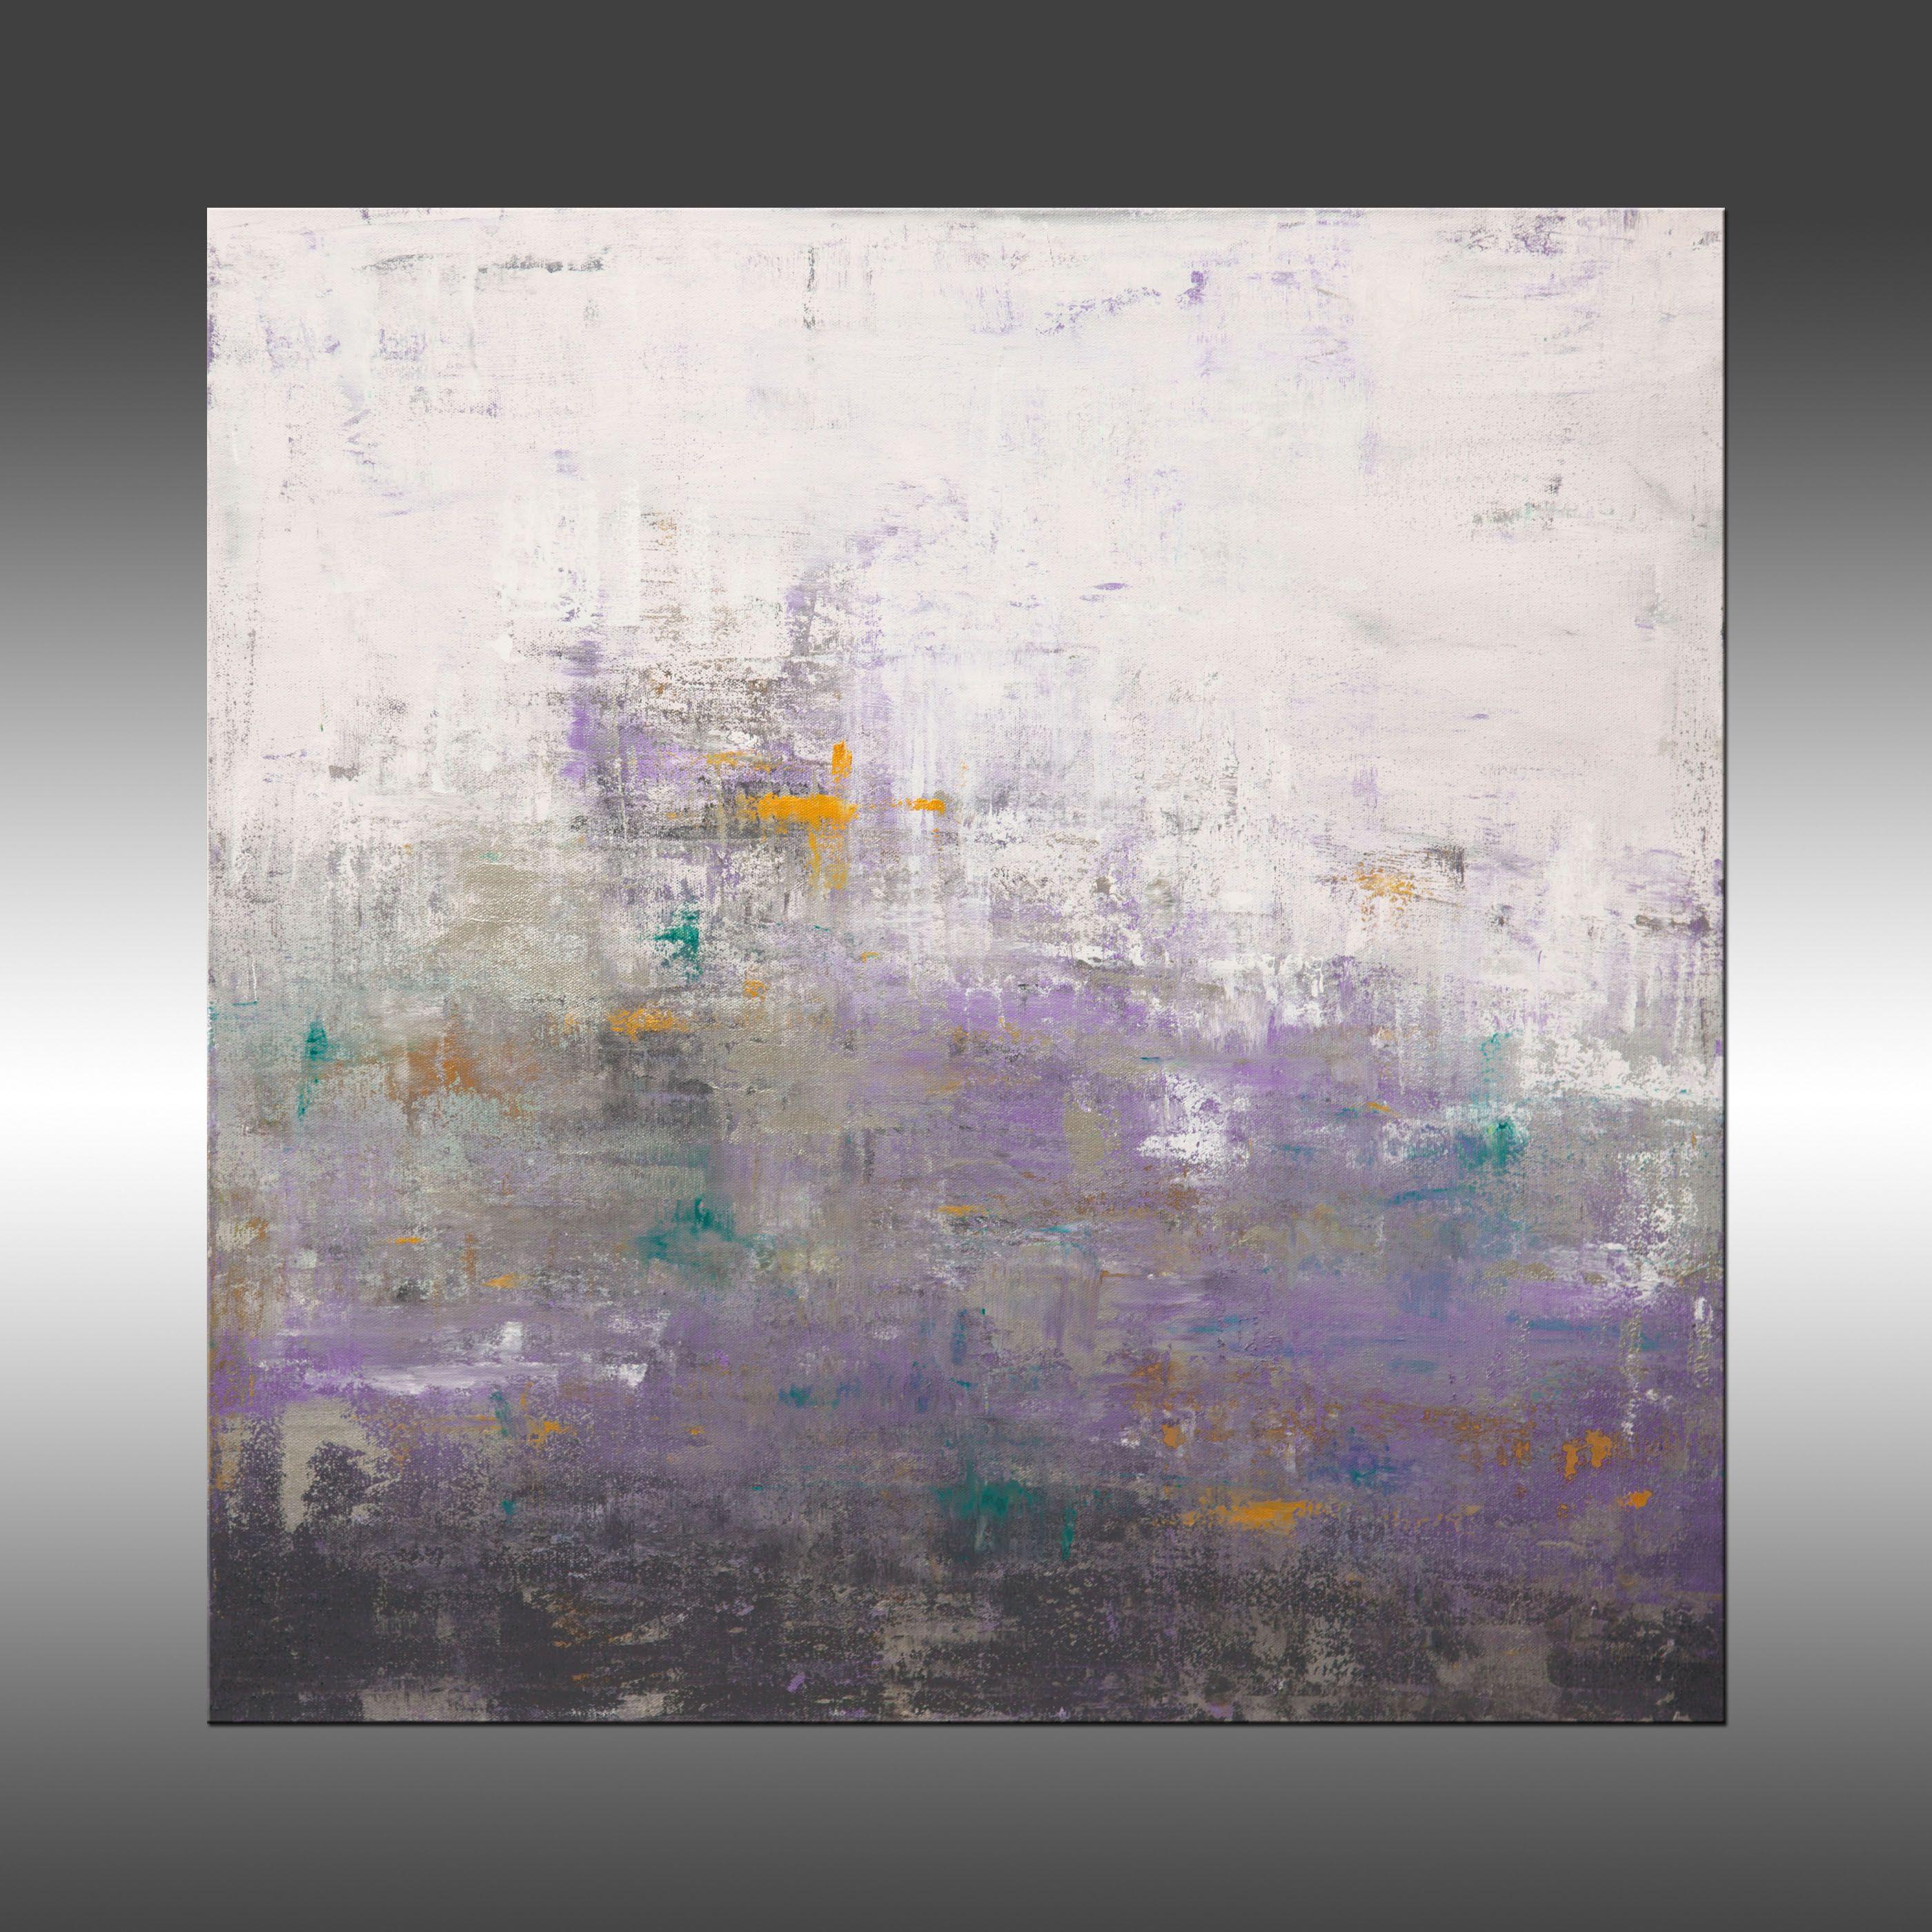 Ascension 16 is an original painting, created with acrylic paint on gallery-wrapped canvas. It has a width of 30 inches and a height of 30 inches with a depth of 1.5 inches (30x30x1.5). The painting continues onto the edges of the canvas, creating a